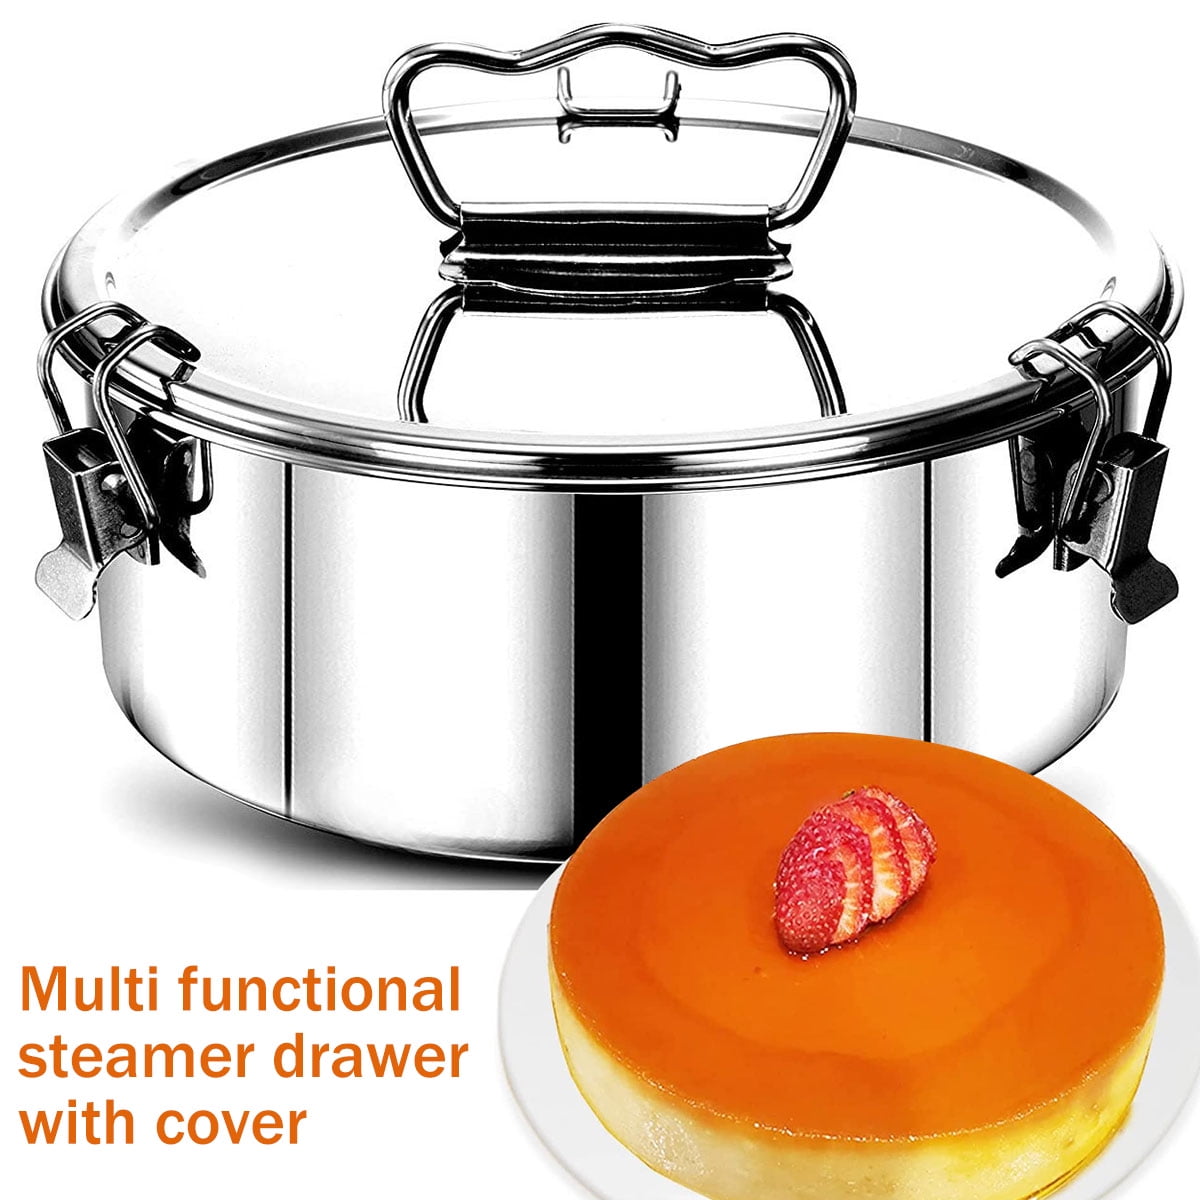 EasyShopForEveryone Stainless Steel Flan Mold 38 oz, Ergonomic Handle for  Easy Lifting, Compatible with Instant Pot 3 qt 6qt, 8qt avail, Pot in Pot  Cooking, Bakeware, Pressure Cooker Accessories 